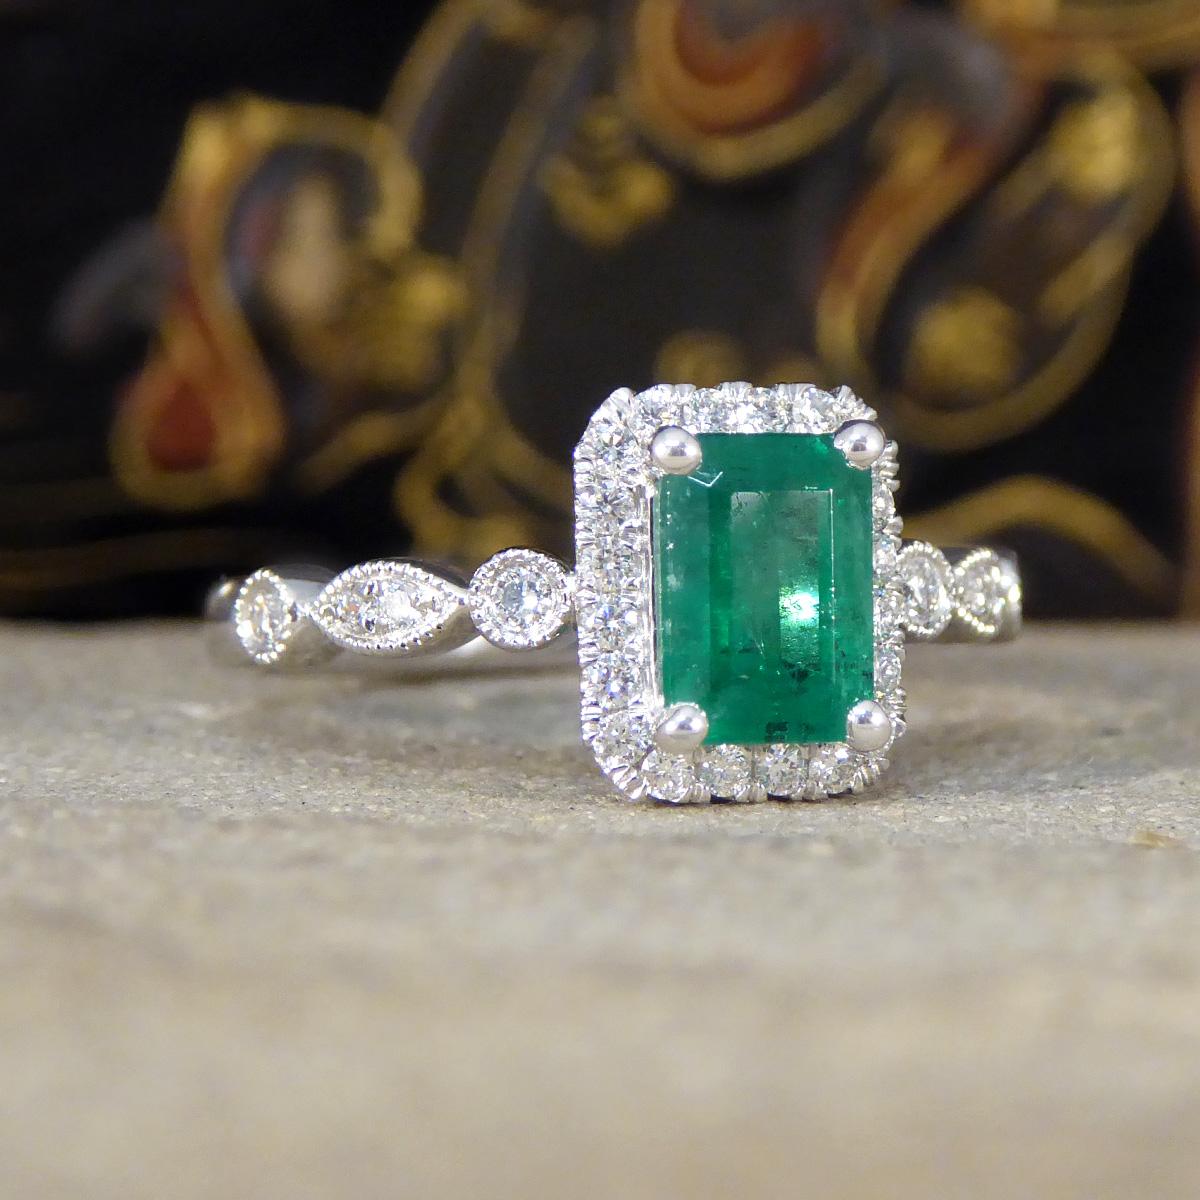 A captivating 1.05ct Emerald Cut Emerald and Diamond Cluster Ring. This ring is a true embodiment of sophistication and grace. Set in the enduring beauty of platinum, this ring features a mesmerising emerald cut emerald at its center with typical